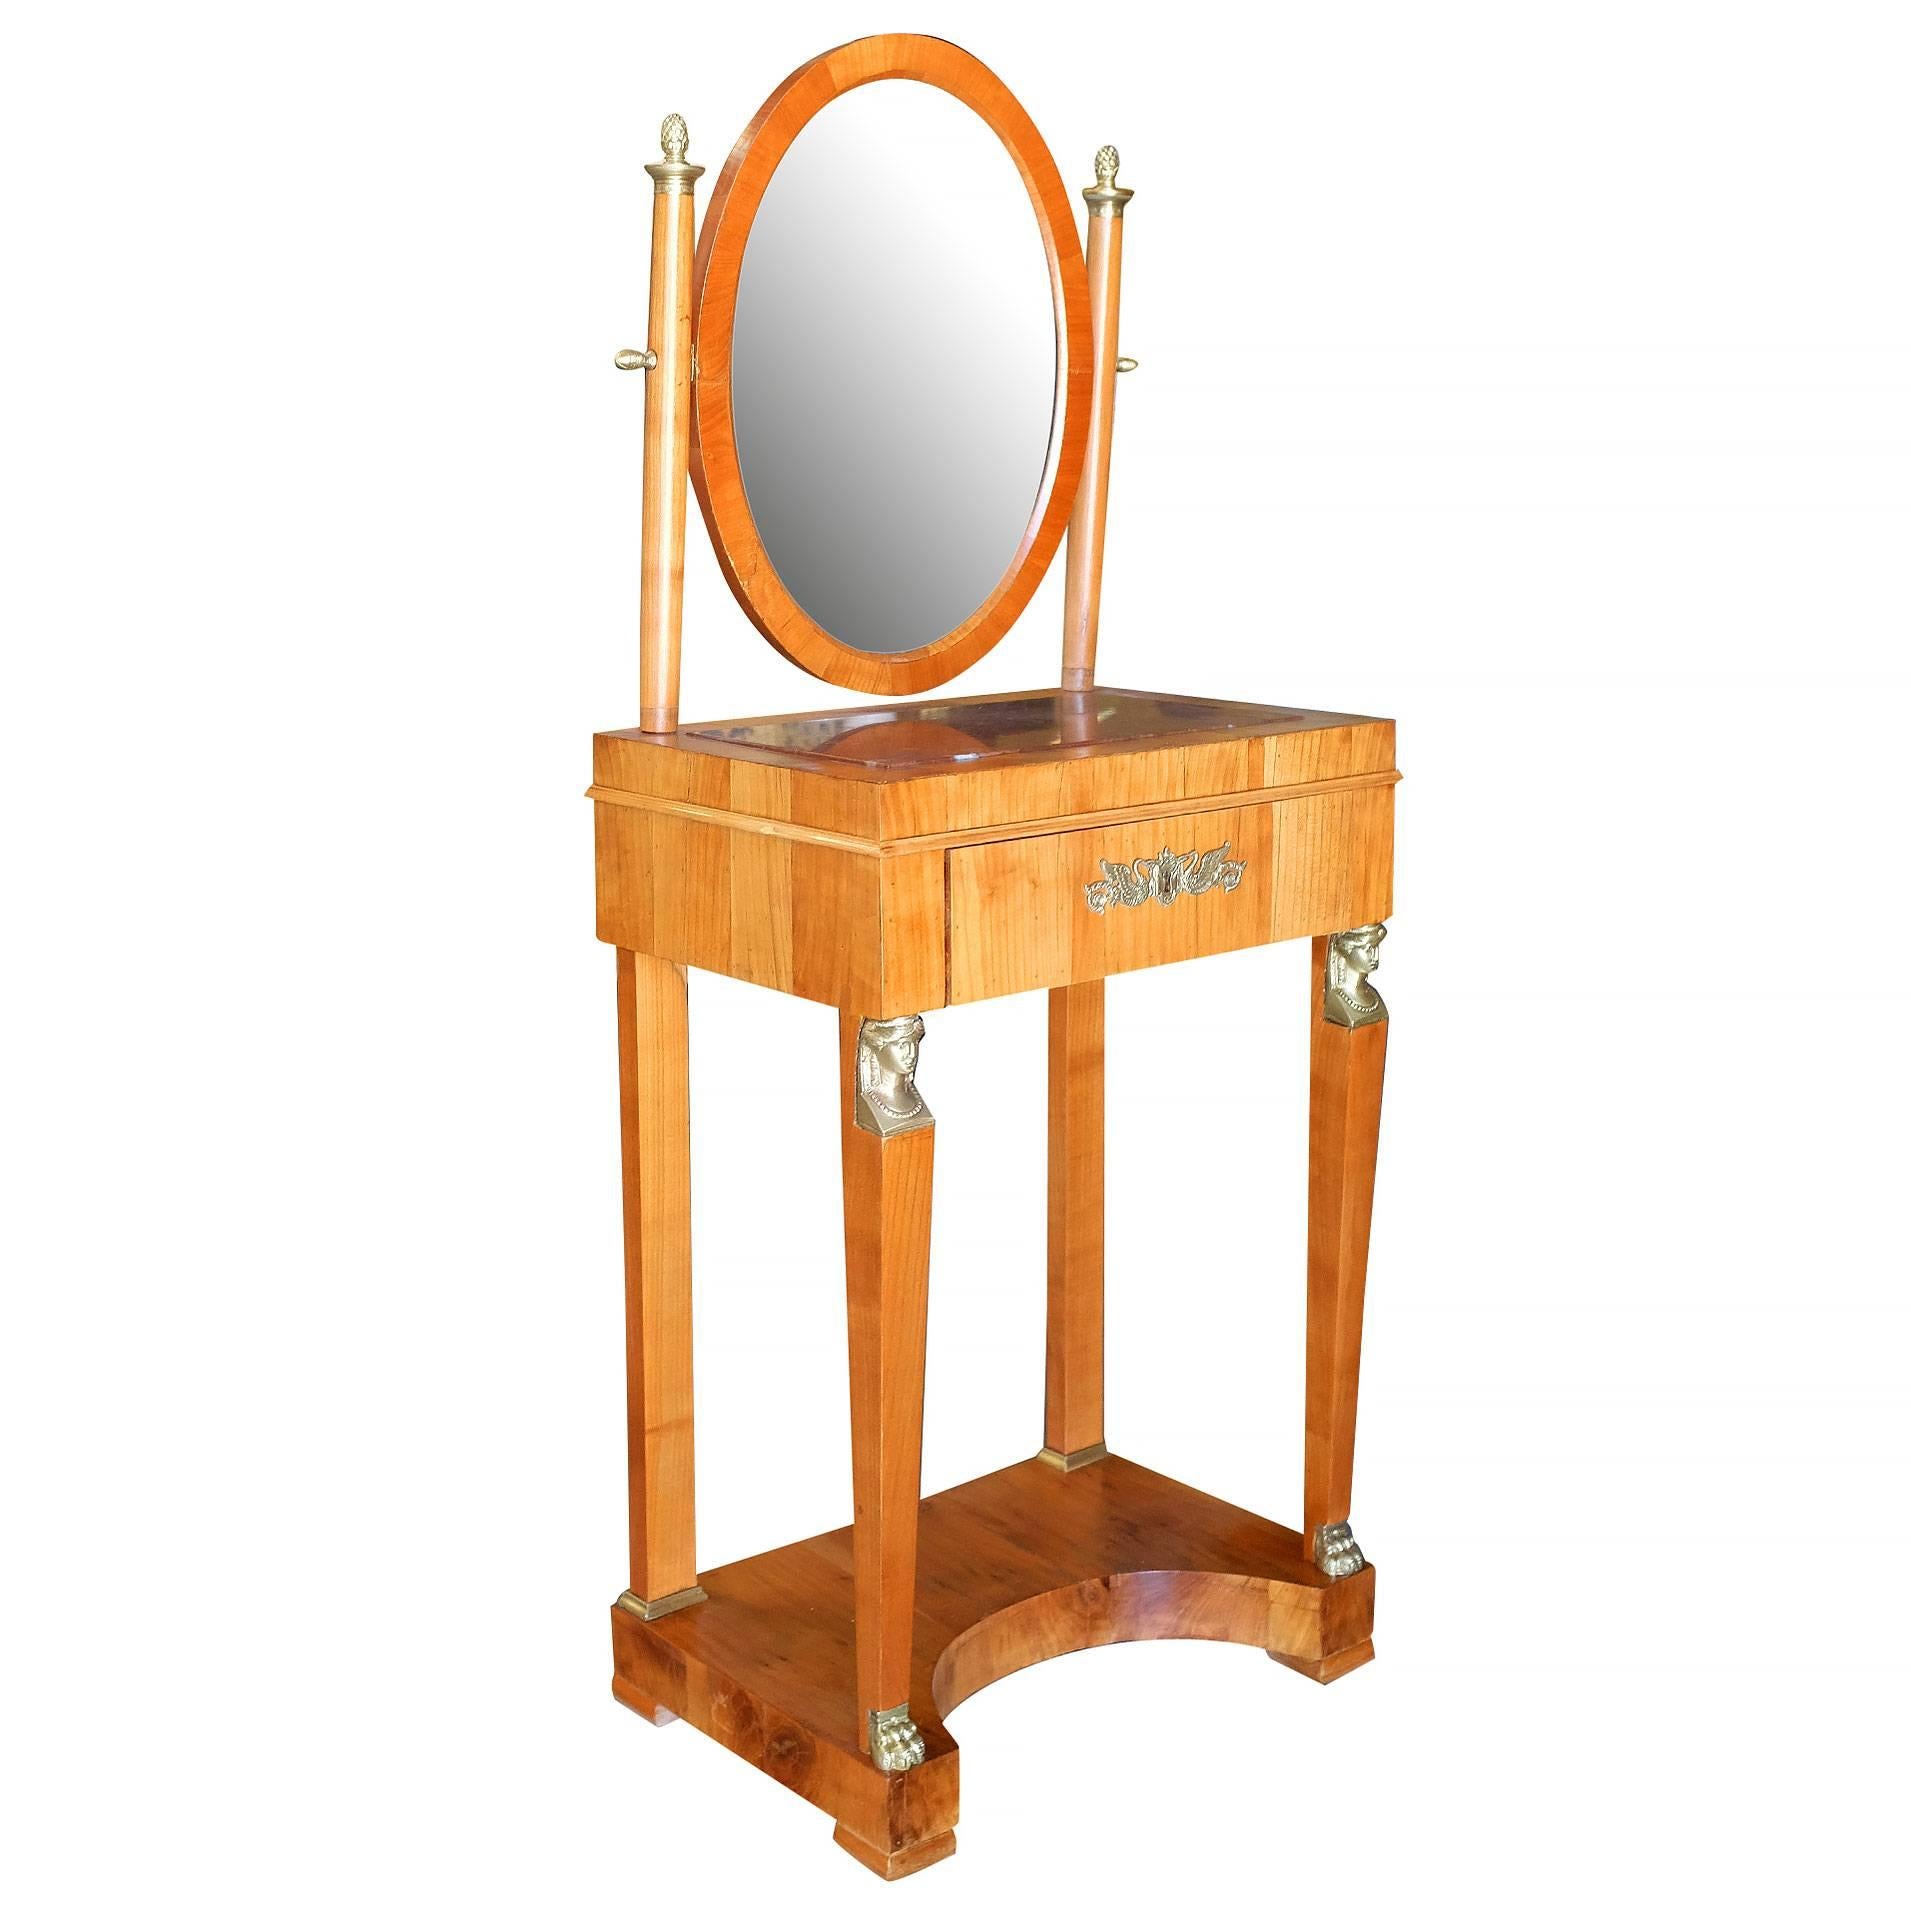 Period French Charles X Style Dressing Table or Vanity with Mirror